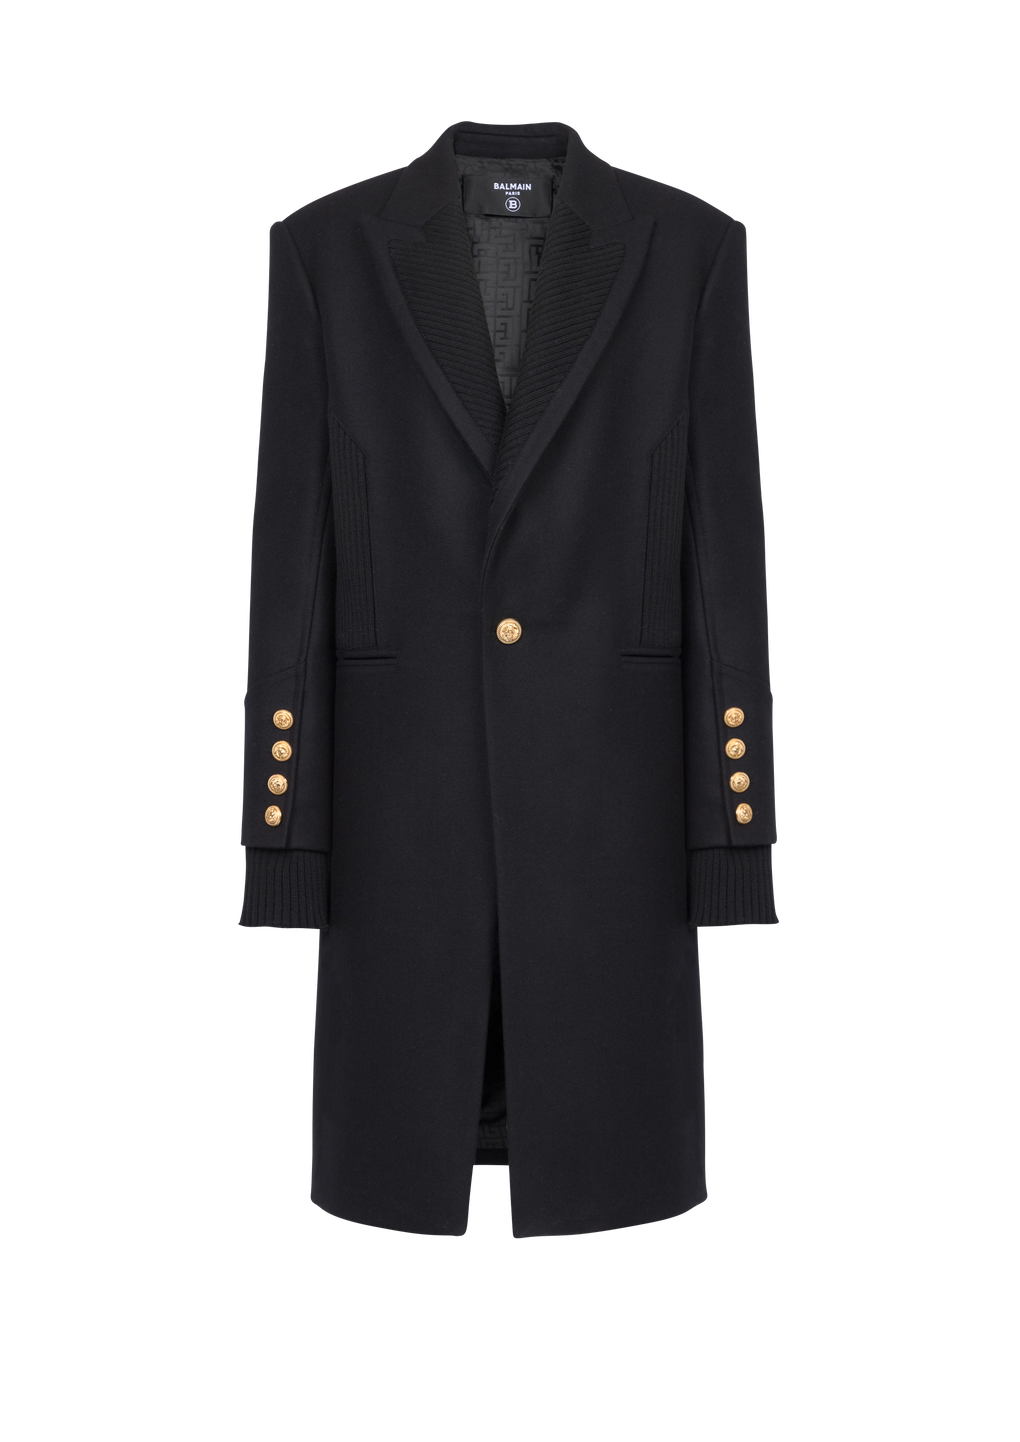 Long wool coat with monogram-patterned collar and lining, black, hi-res